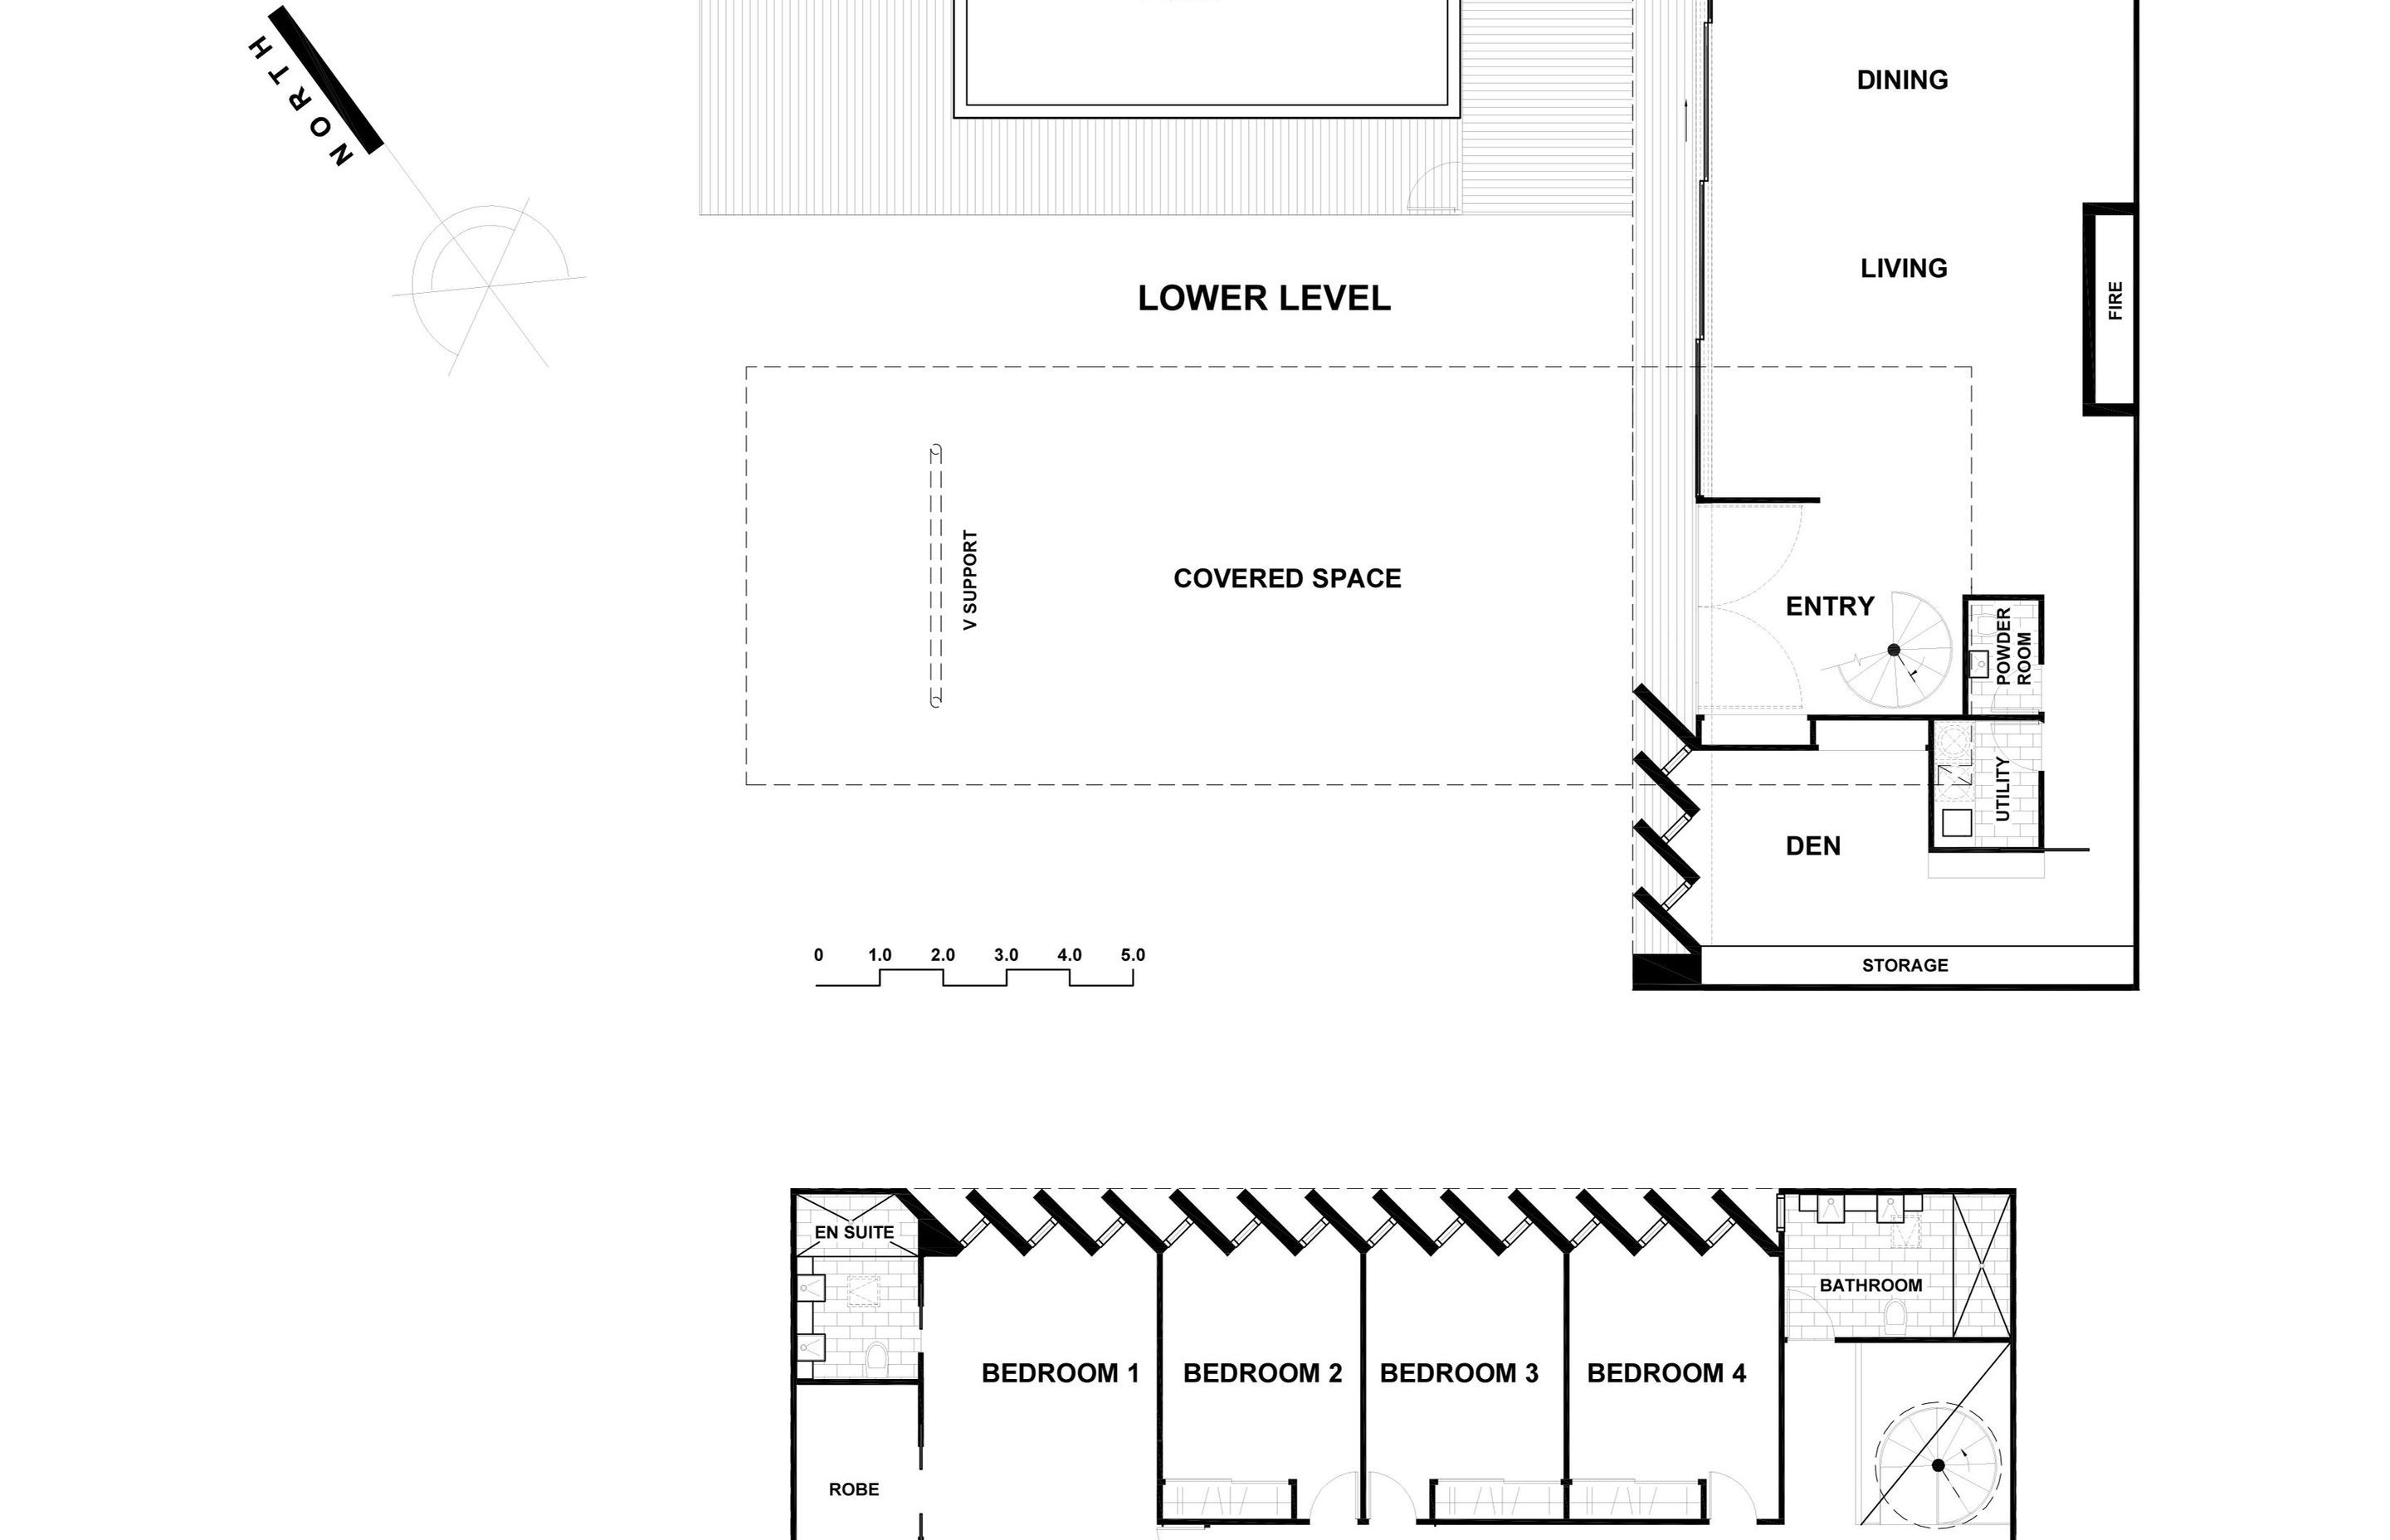 Floor plan of Takapuna House's upper and lower levels.